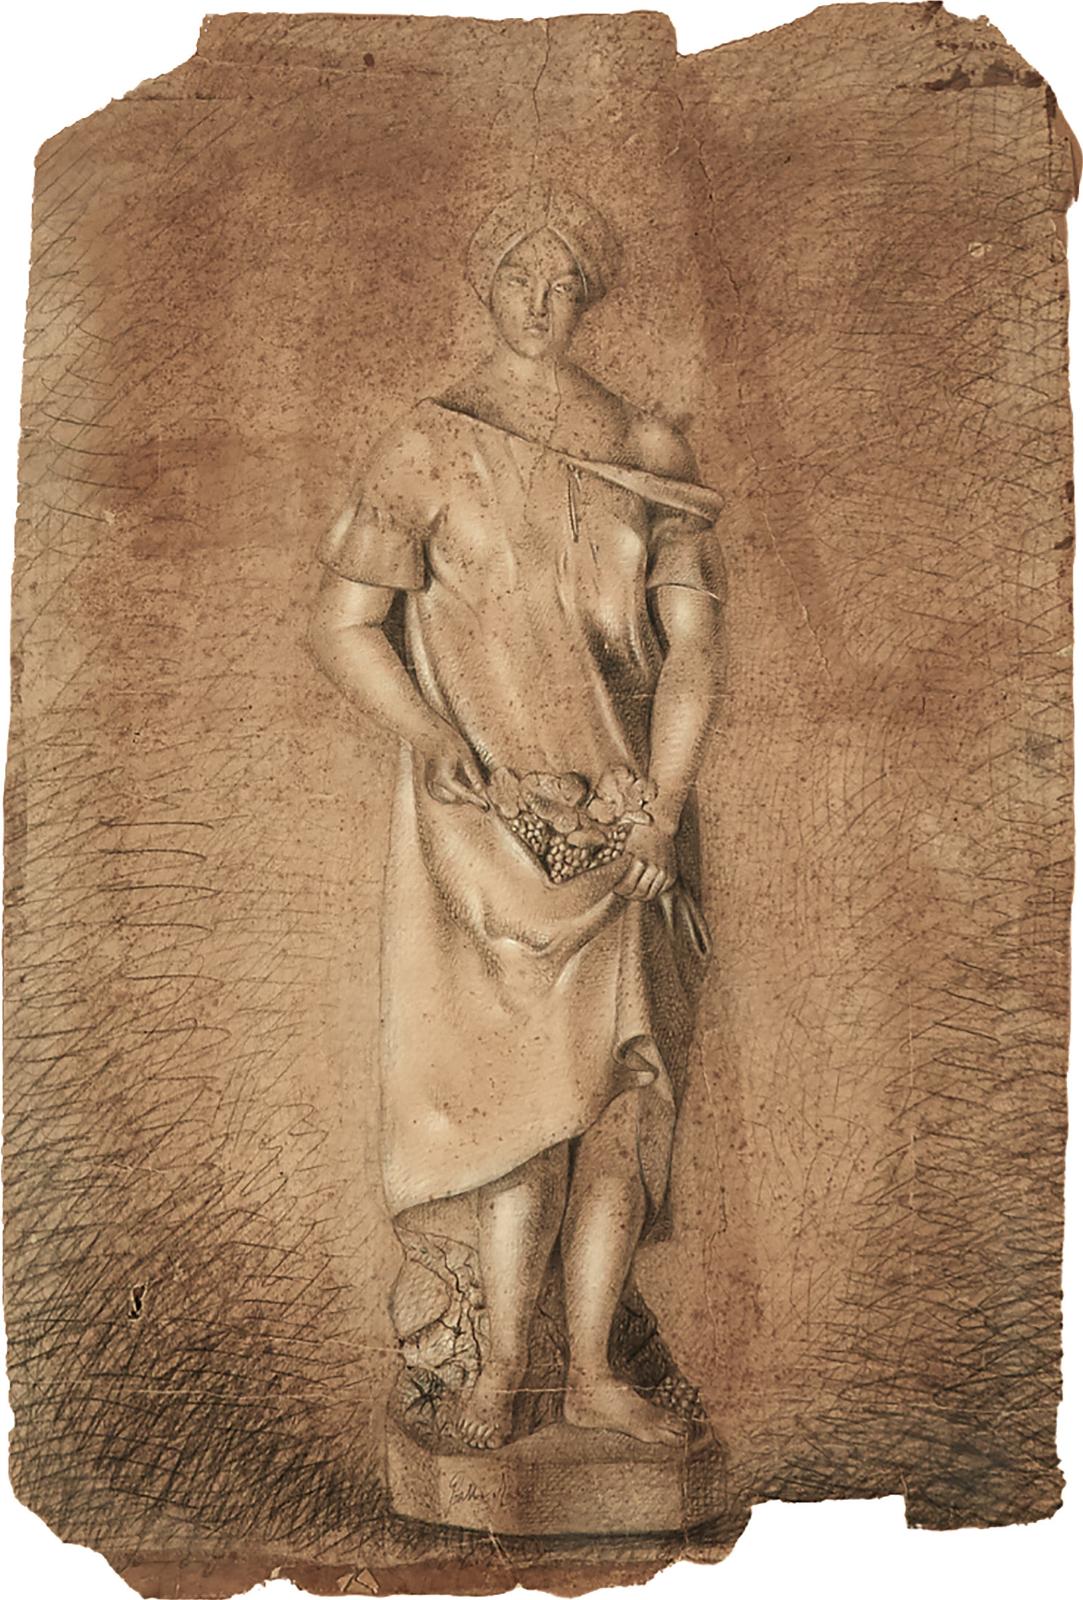 Italian School-Milanese - Study Of An Antique Figural Sculpture Of The Wine Harvest